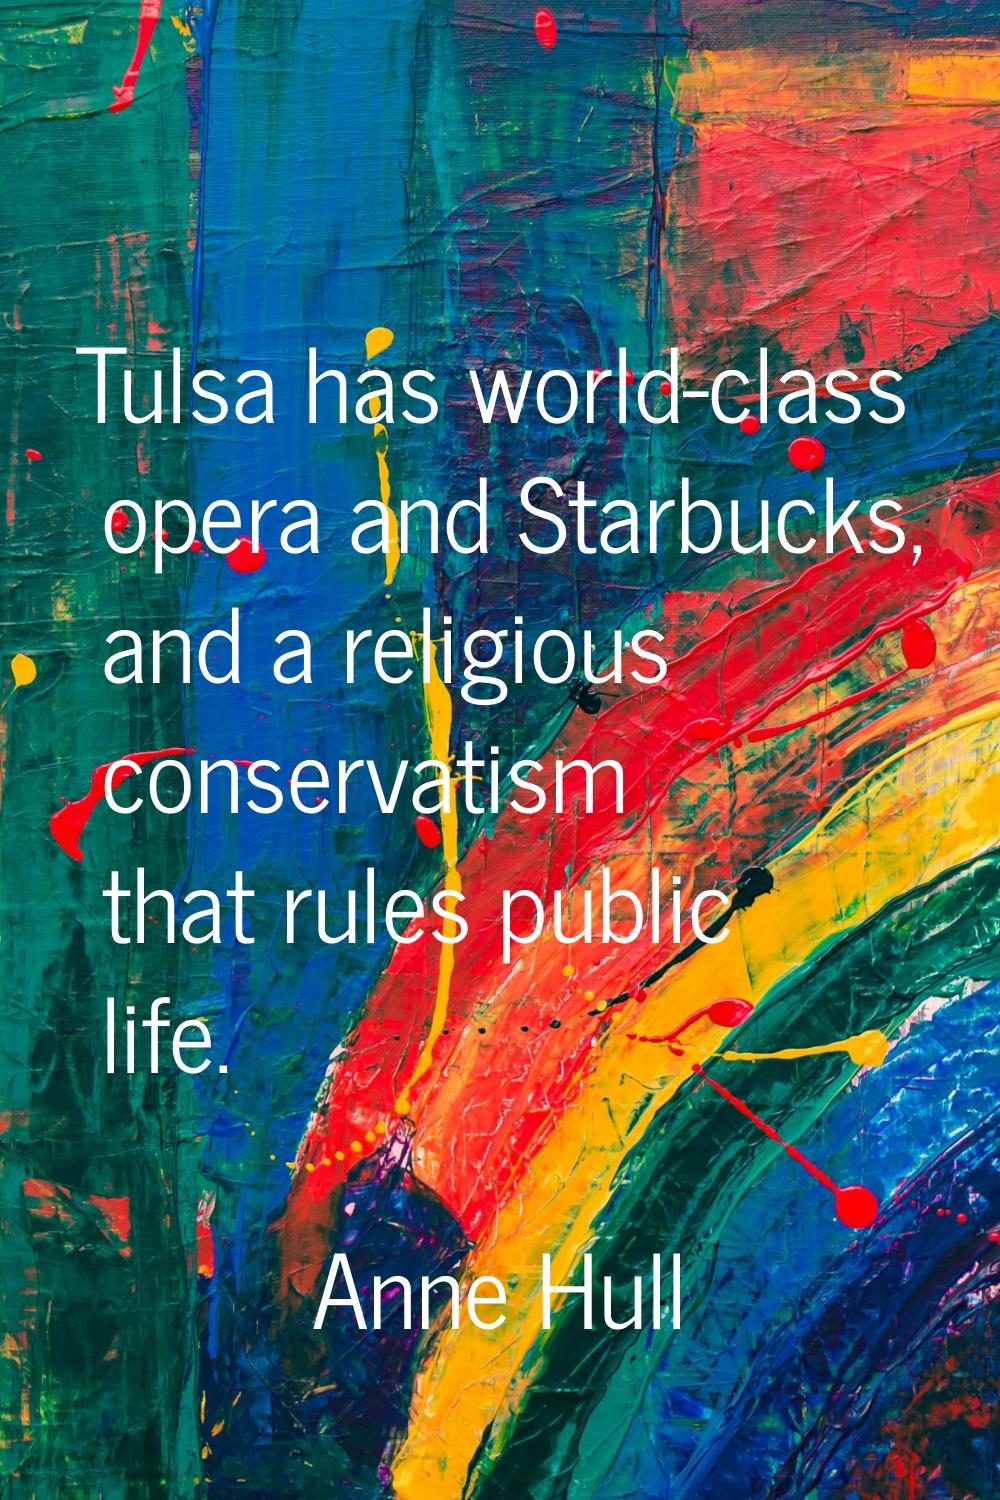 Tulsa has world-class opera and Starbucks, and a religious conservatism that rules public life.